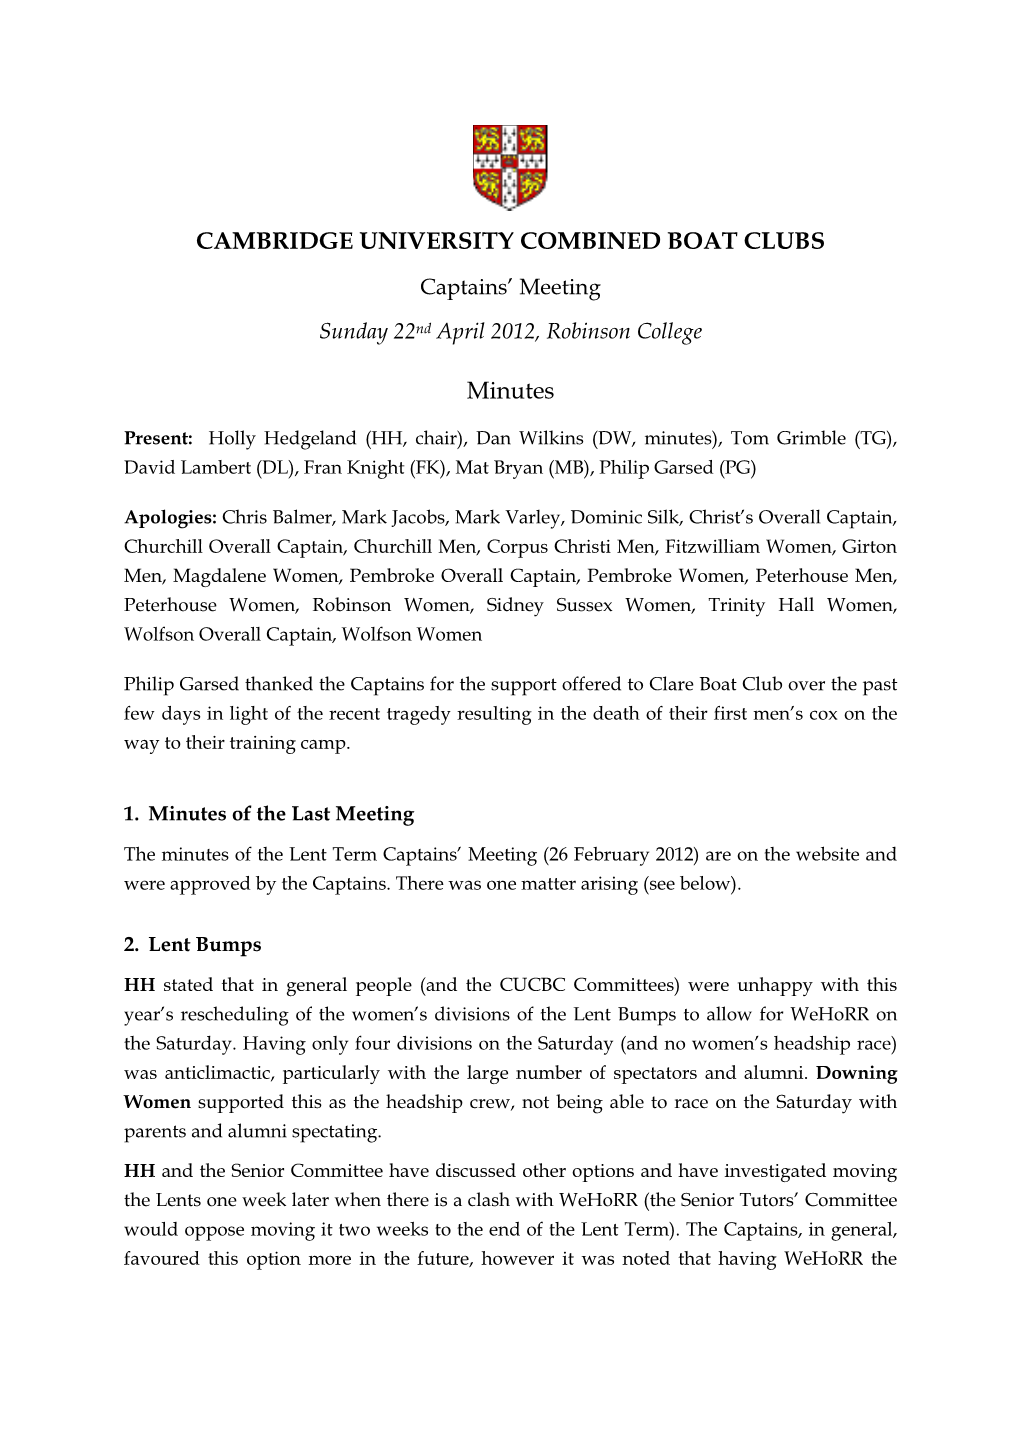 CAMBRIDGE UNIVERSITY COMBINED BOAT CLUBS Minutes